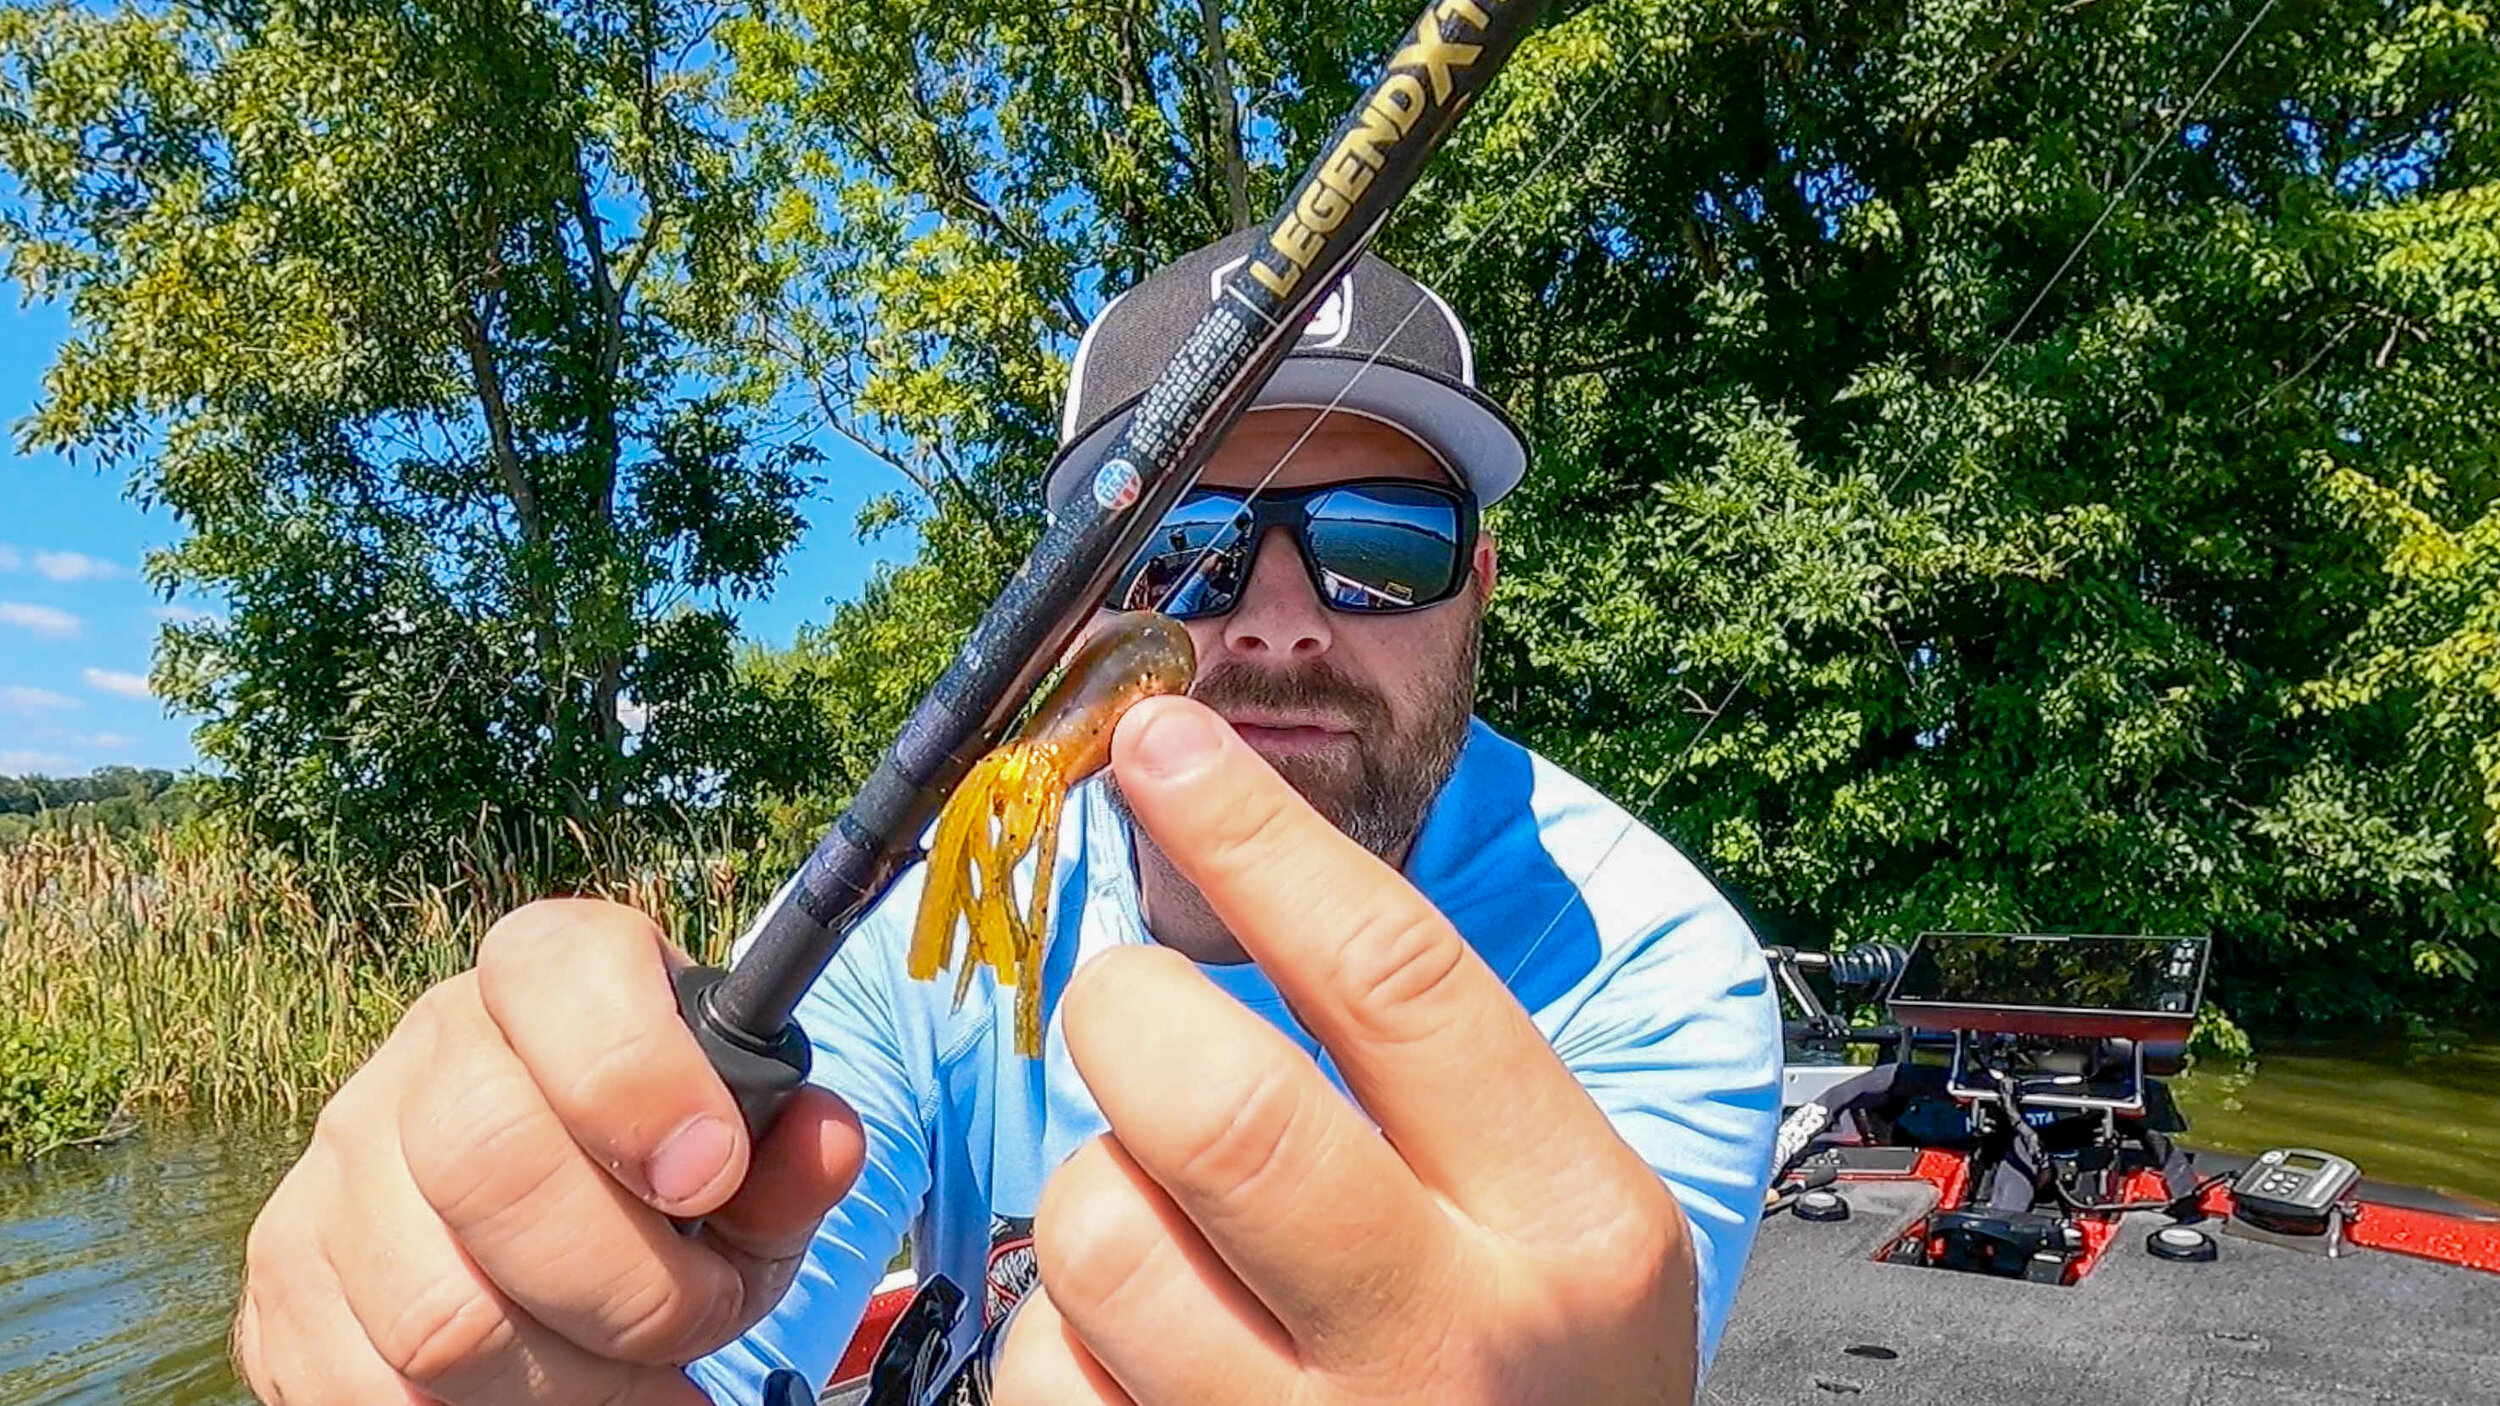 3 Ned Rig Tricks For Winter Fishing! — Tactical Bassin' - Bass